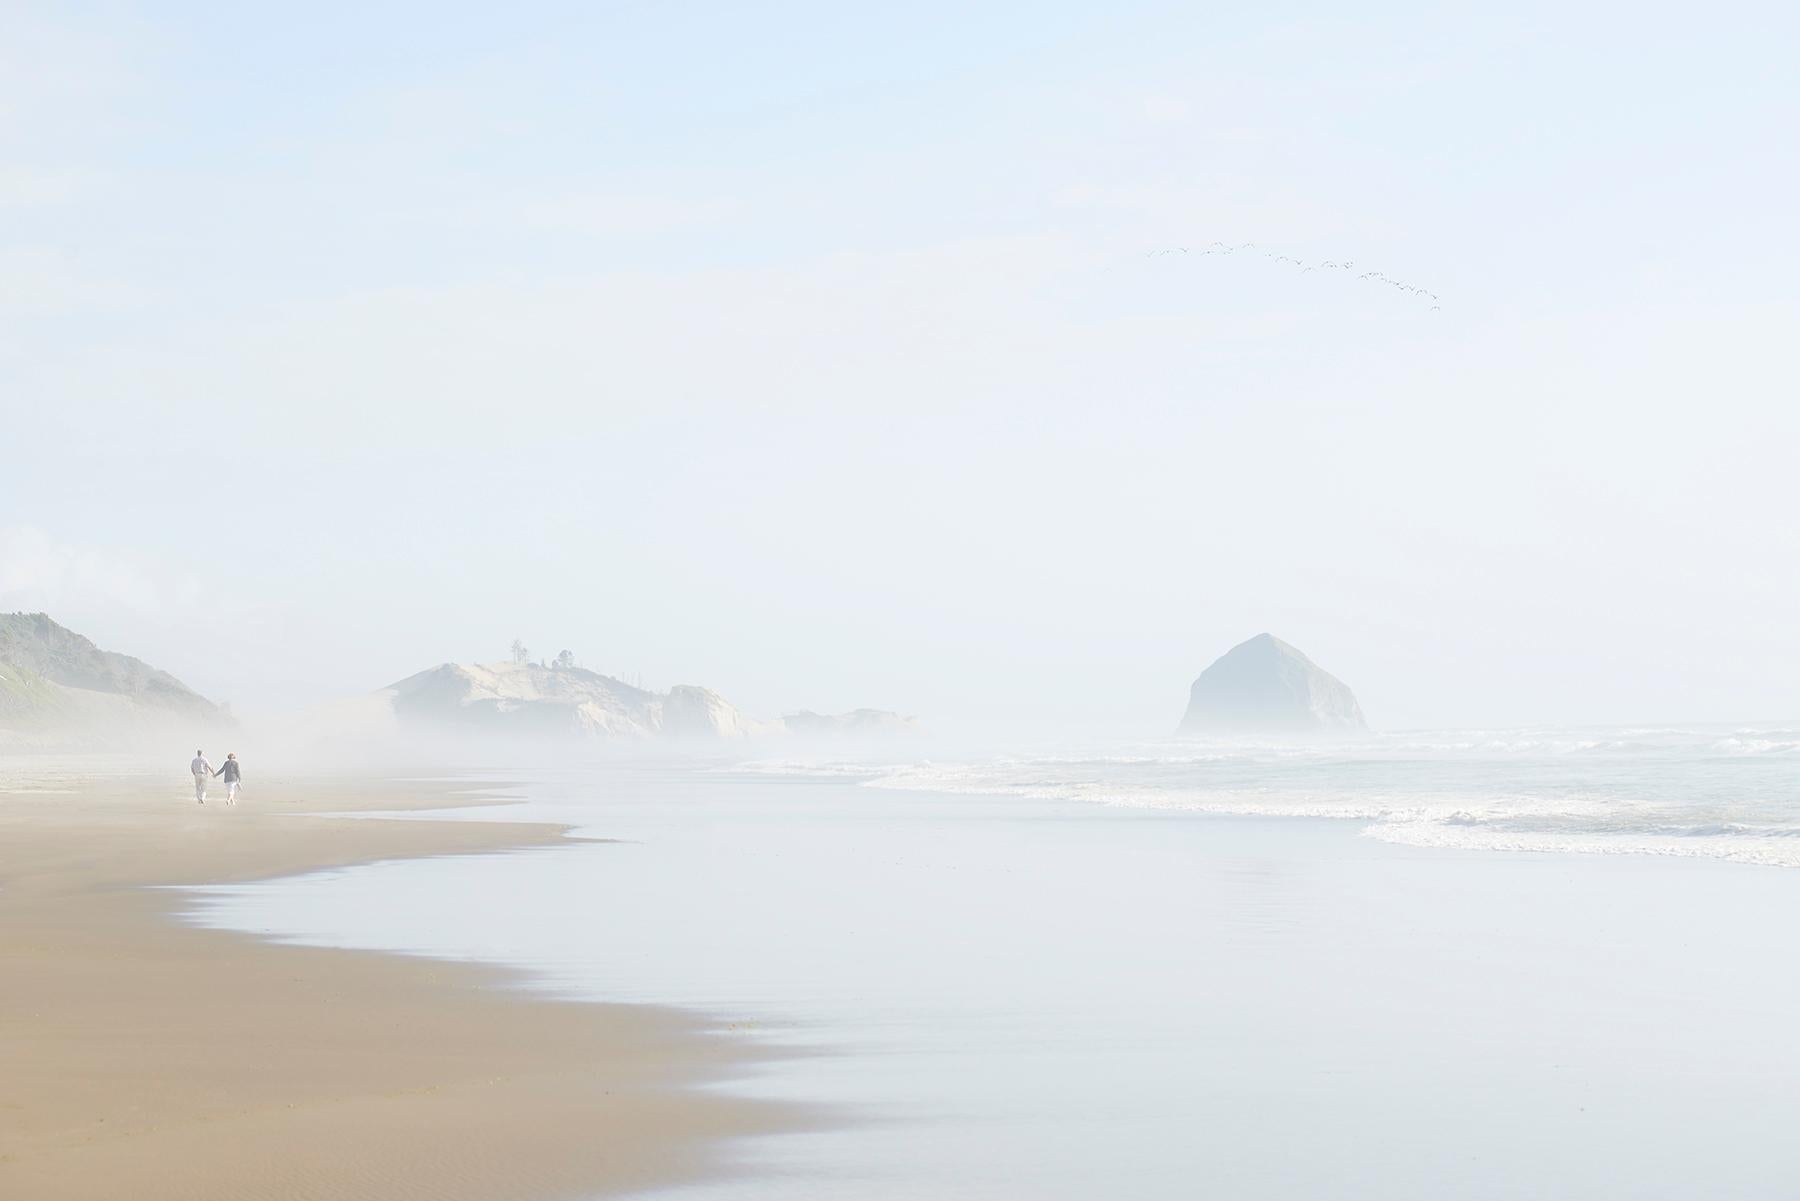 Peter Andrew Lusztyk - Pacific City, Photography 2021, Printed After